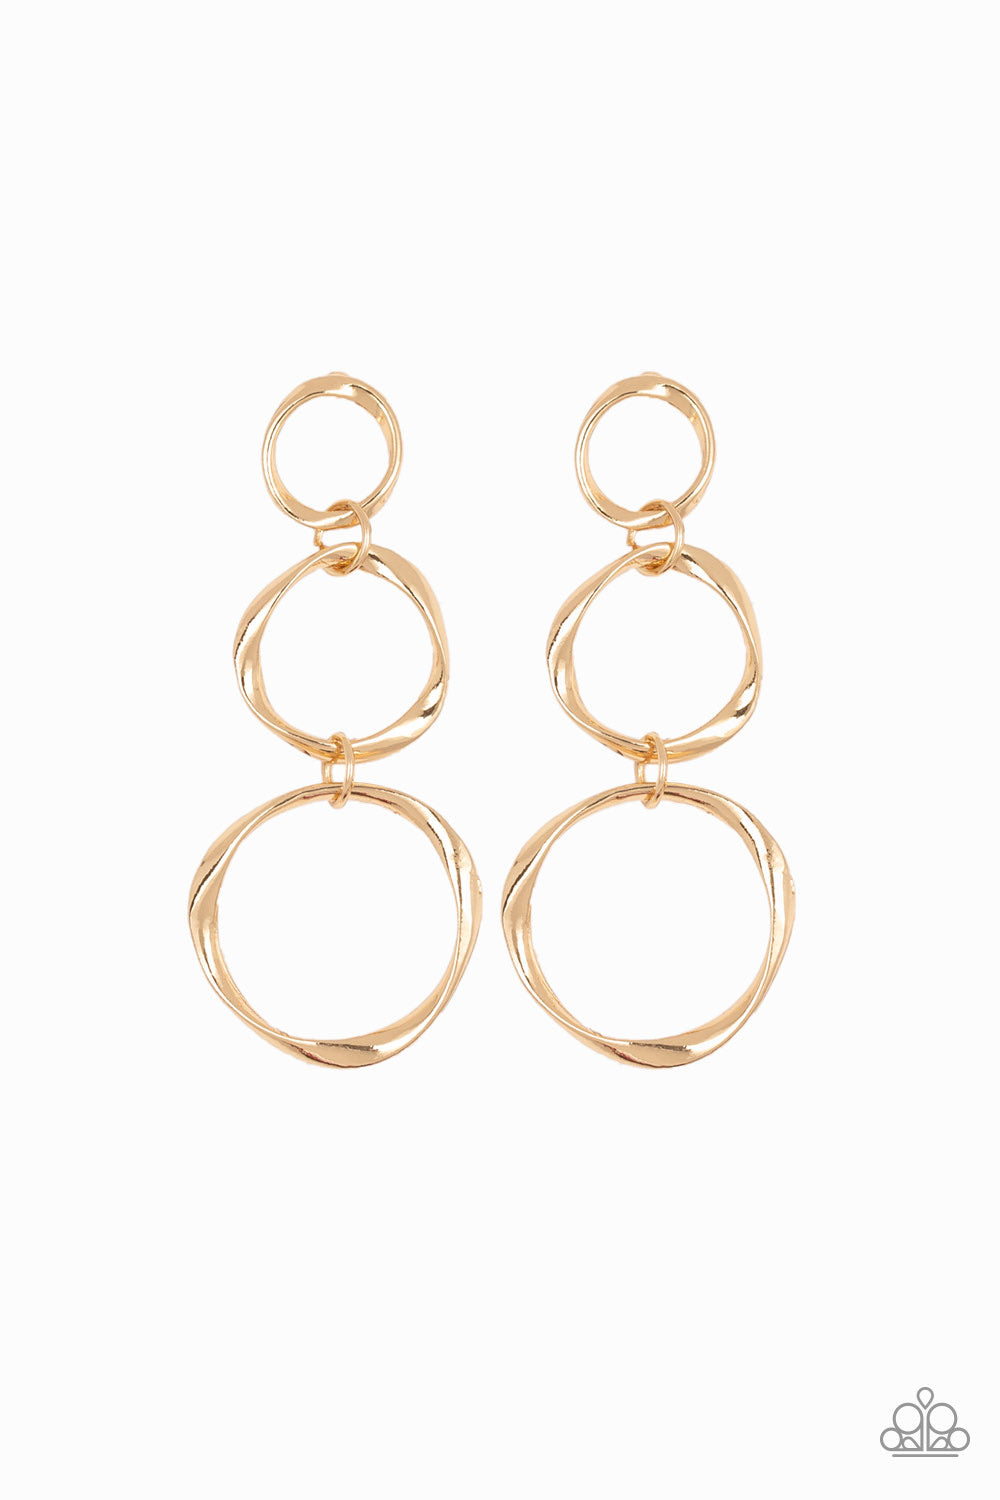 Three Ring Radiance Gold-Earrings